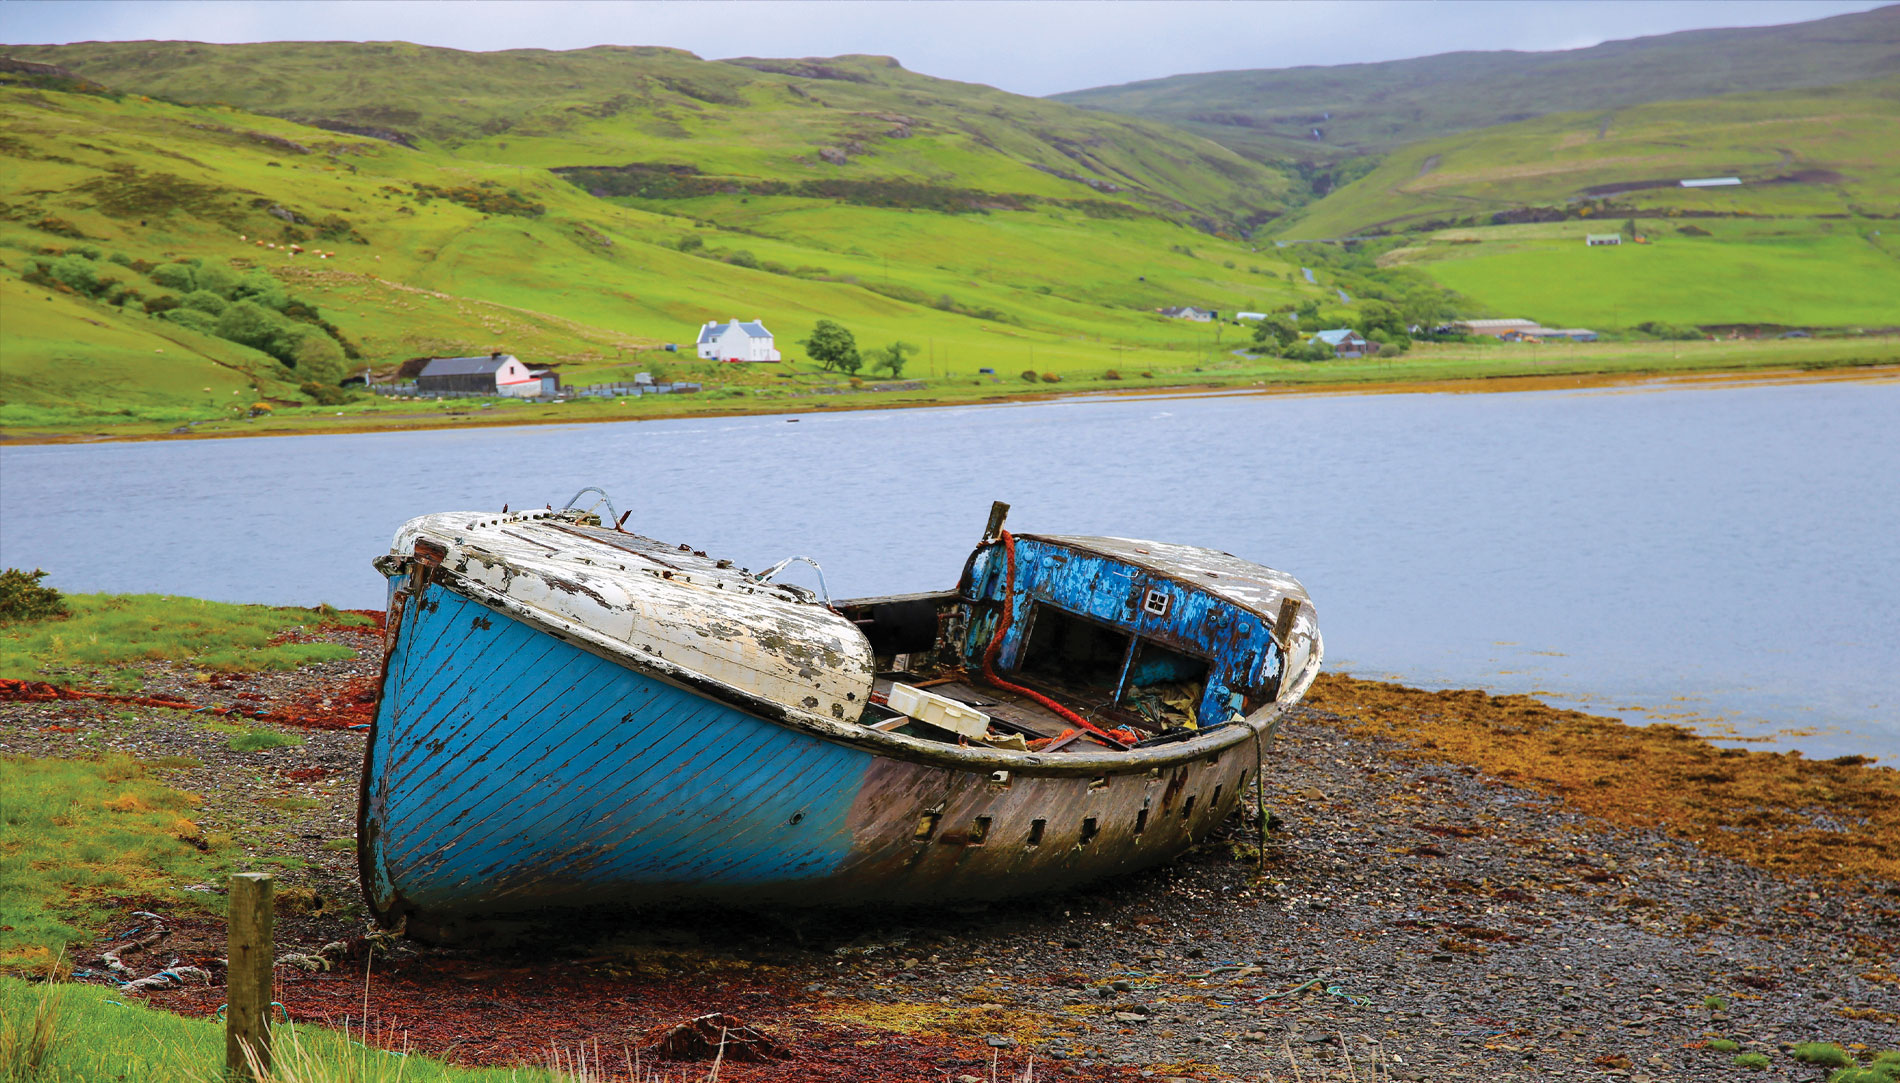 A beat-up boat on the shores of Scotland's Isle of Skye